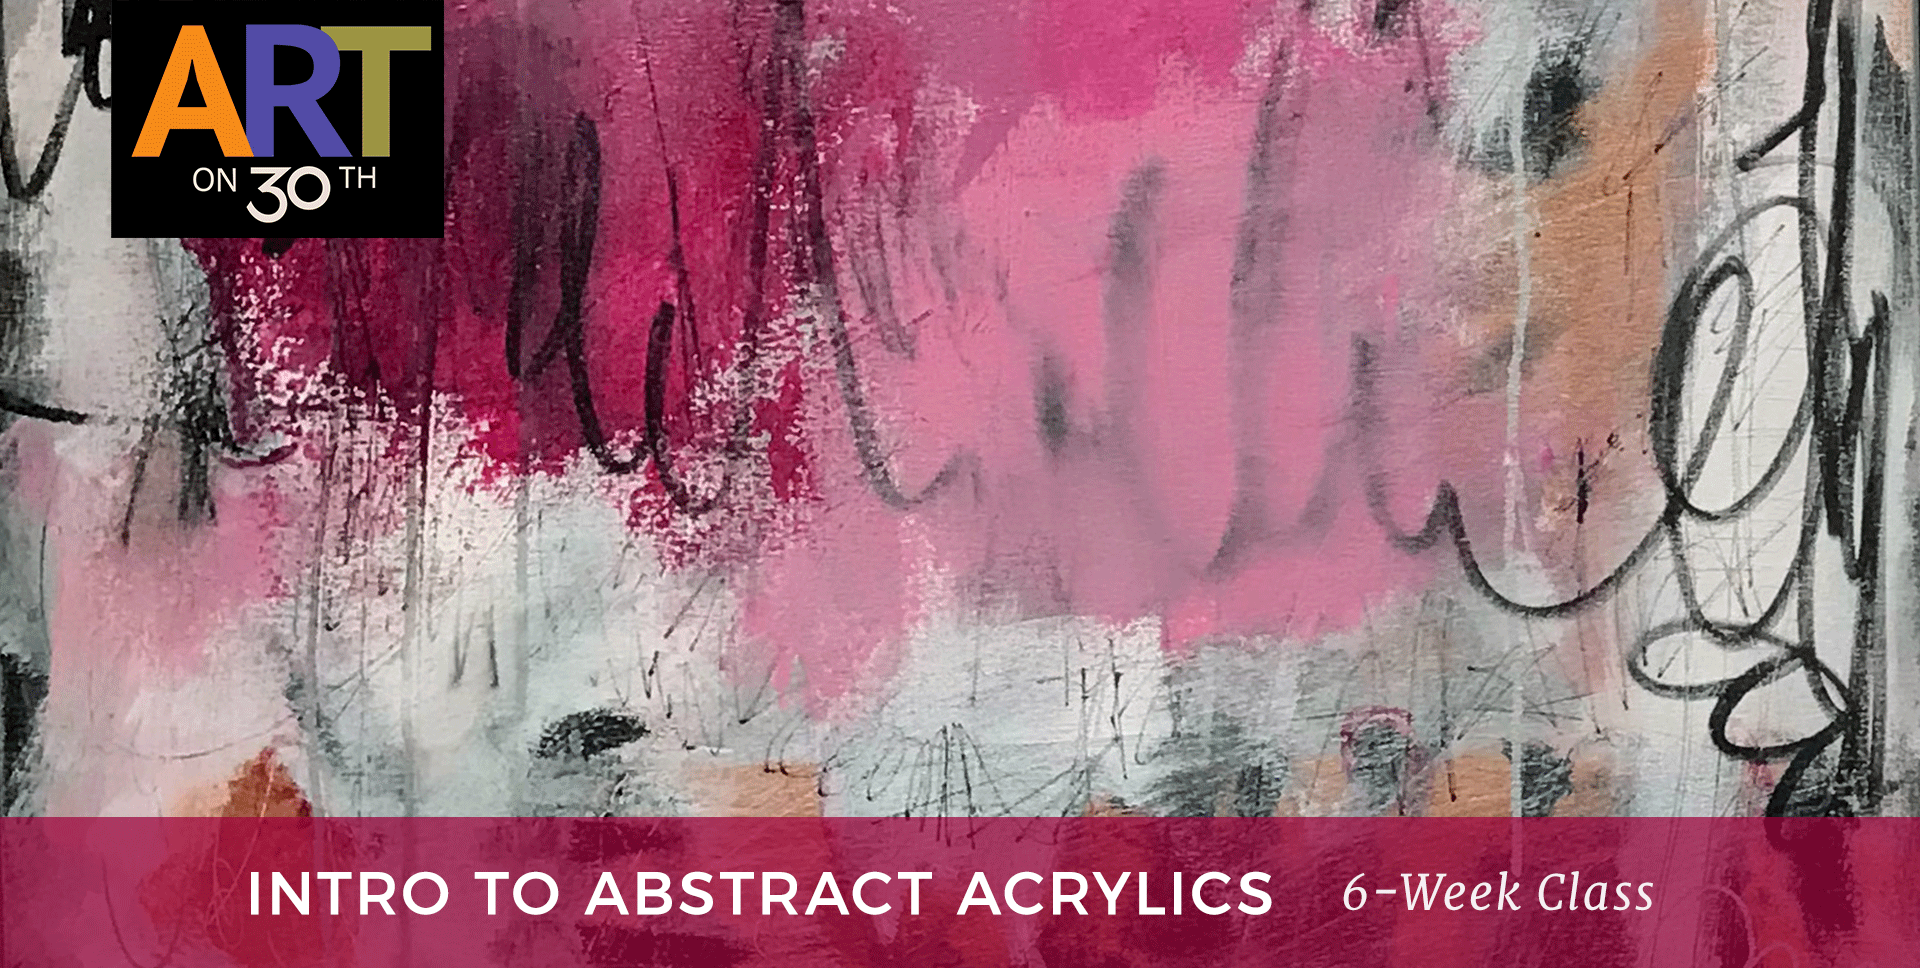 WED - Intro to Abstract Acrylic Painting with Laurie Fuller